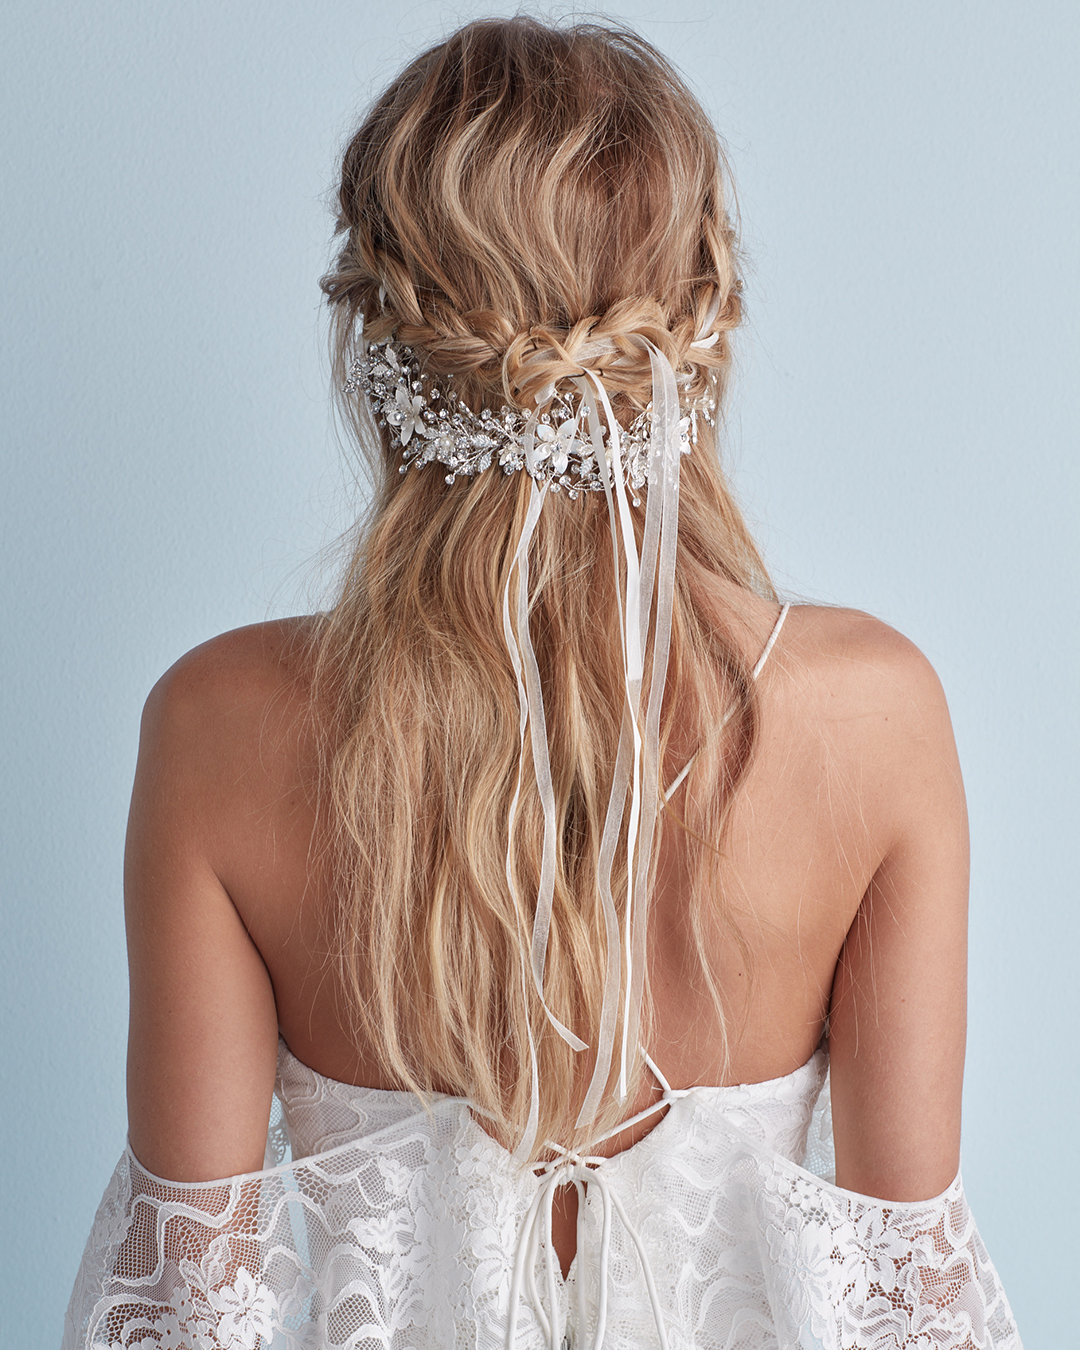 Wedding hairstyle with braid and crystal headband in half-up style